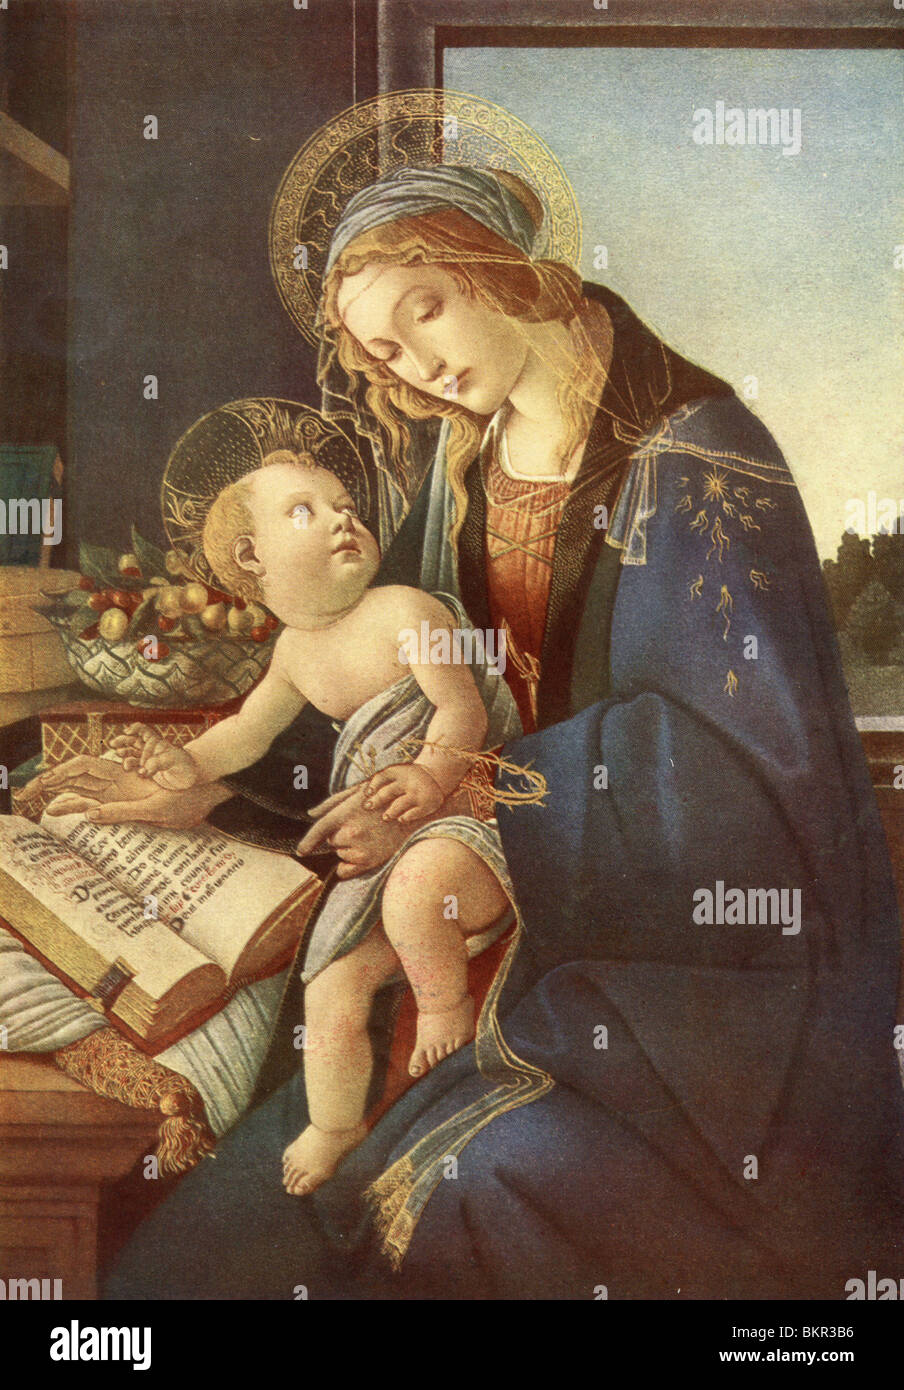 MOTHER AND CHILD. Sandro Botticelli, Alessandro Filipepi 1444-1510, Published by The Illustrated London News Stock Photo